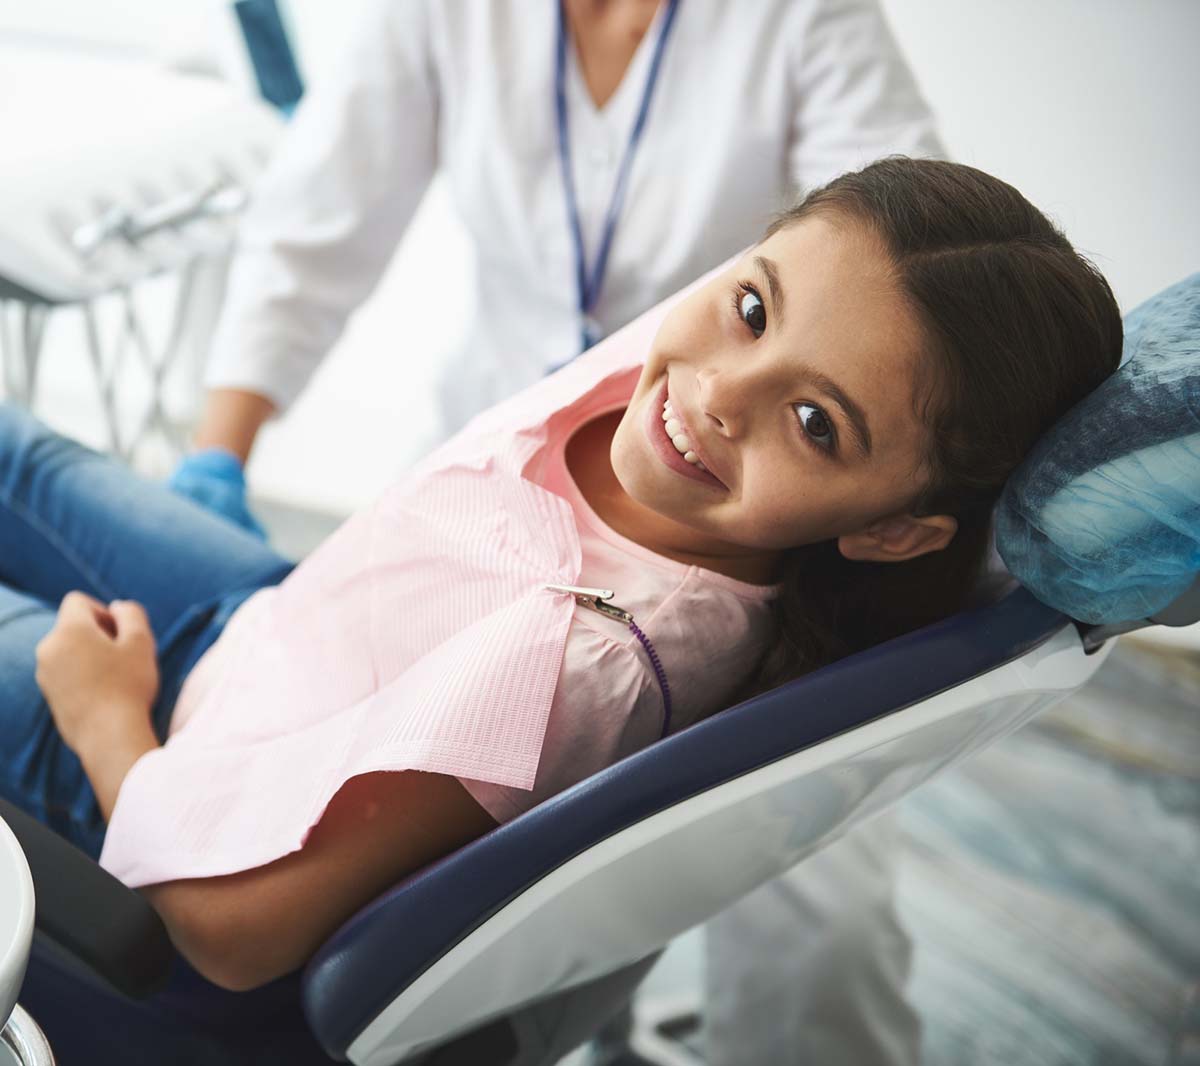 Is Sedation Dentistry Safe for My Child